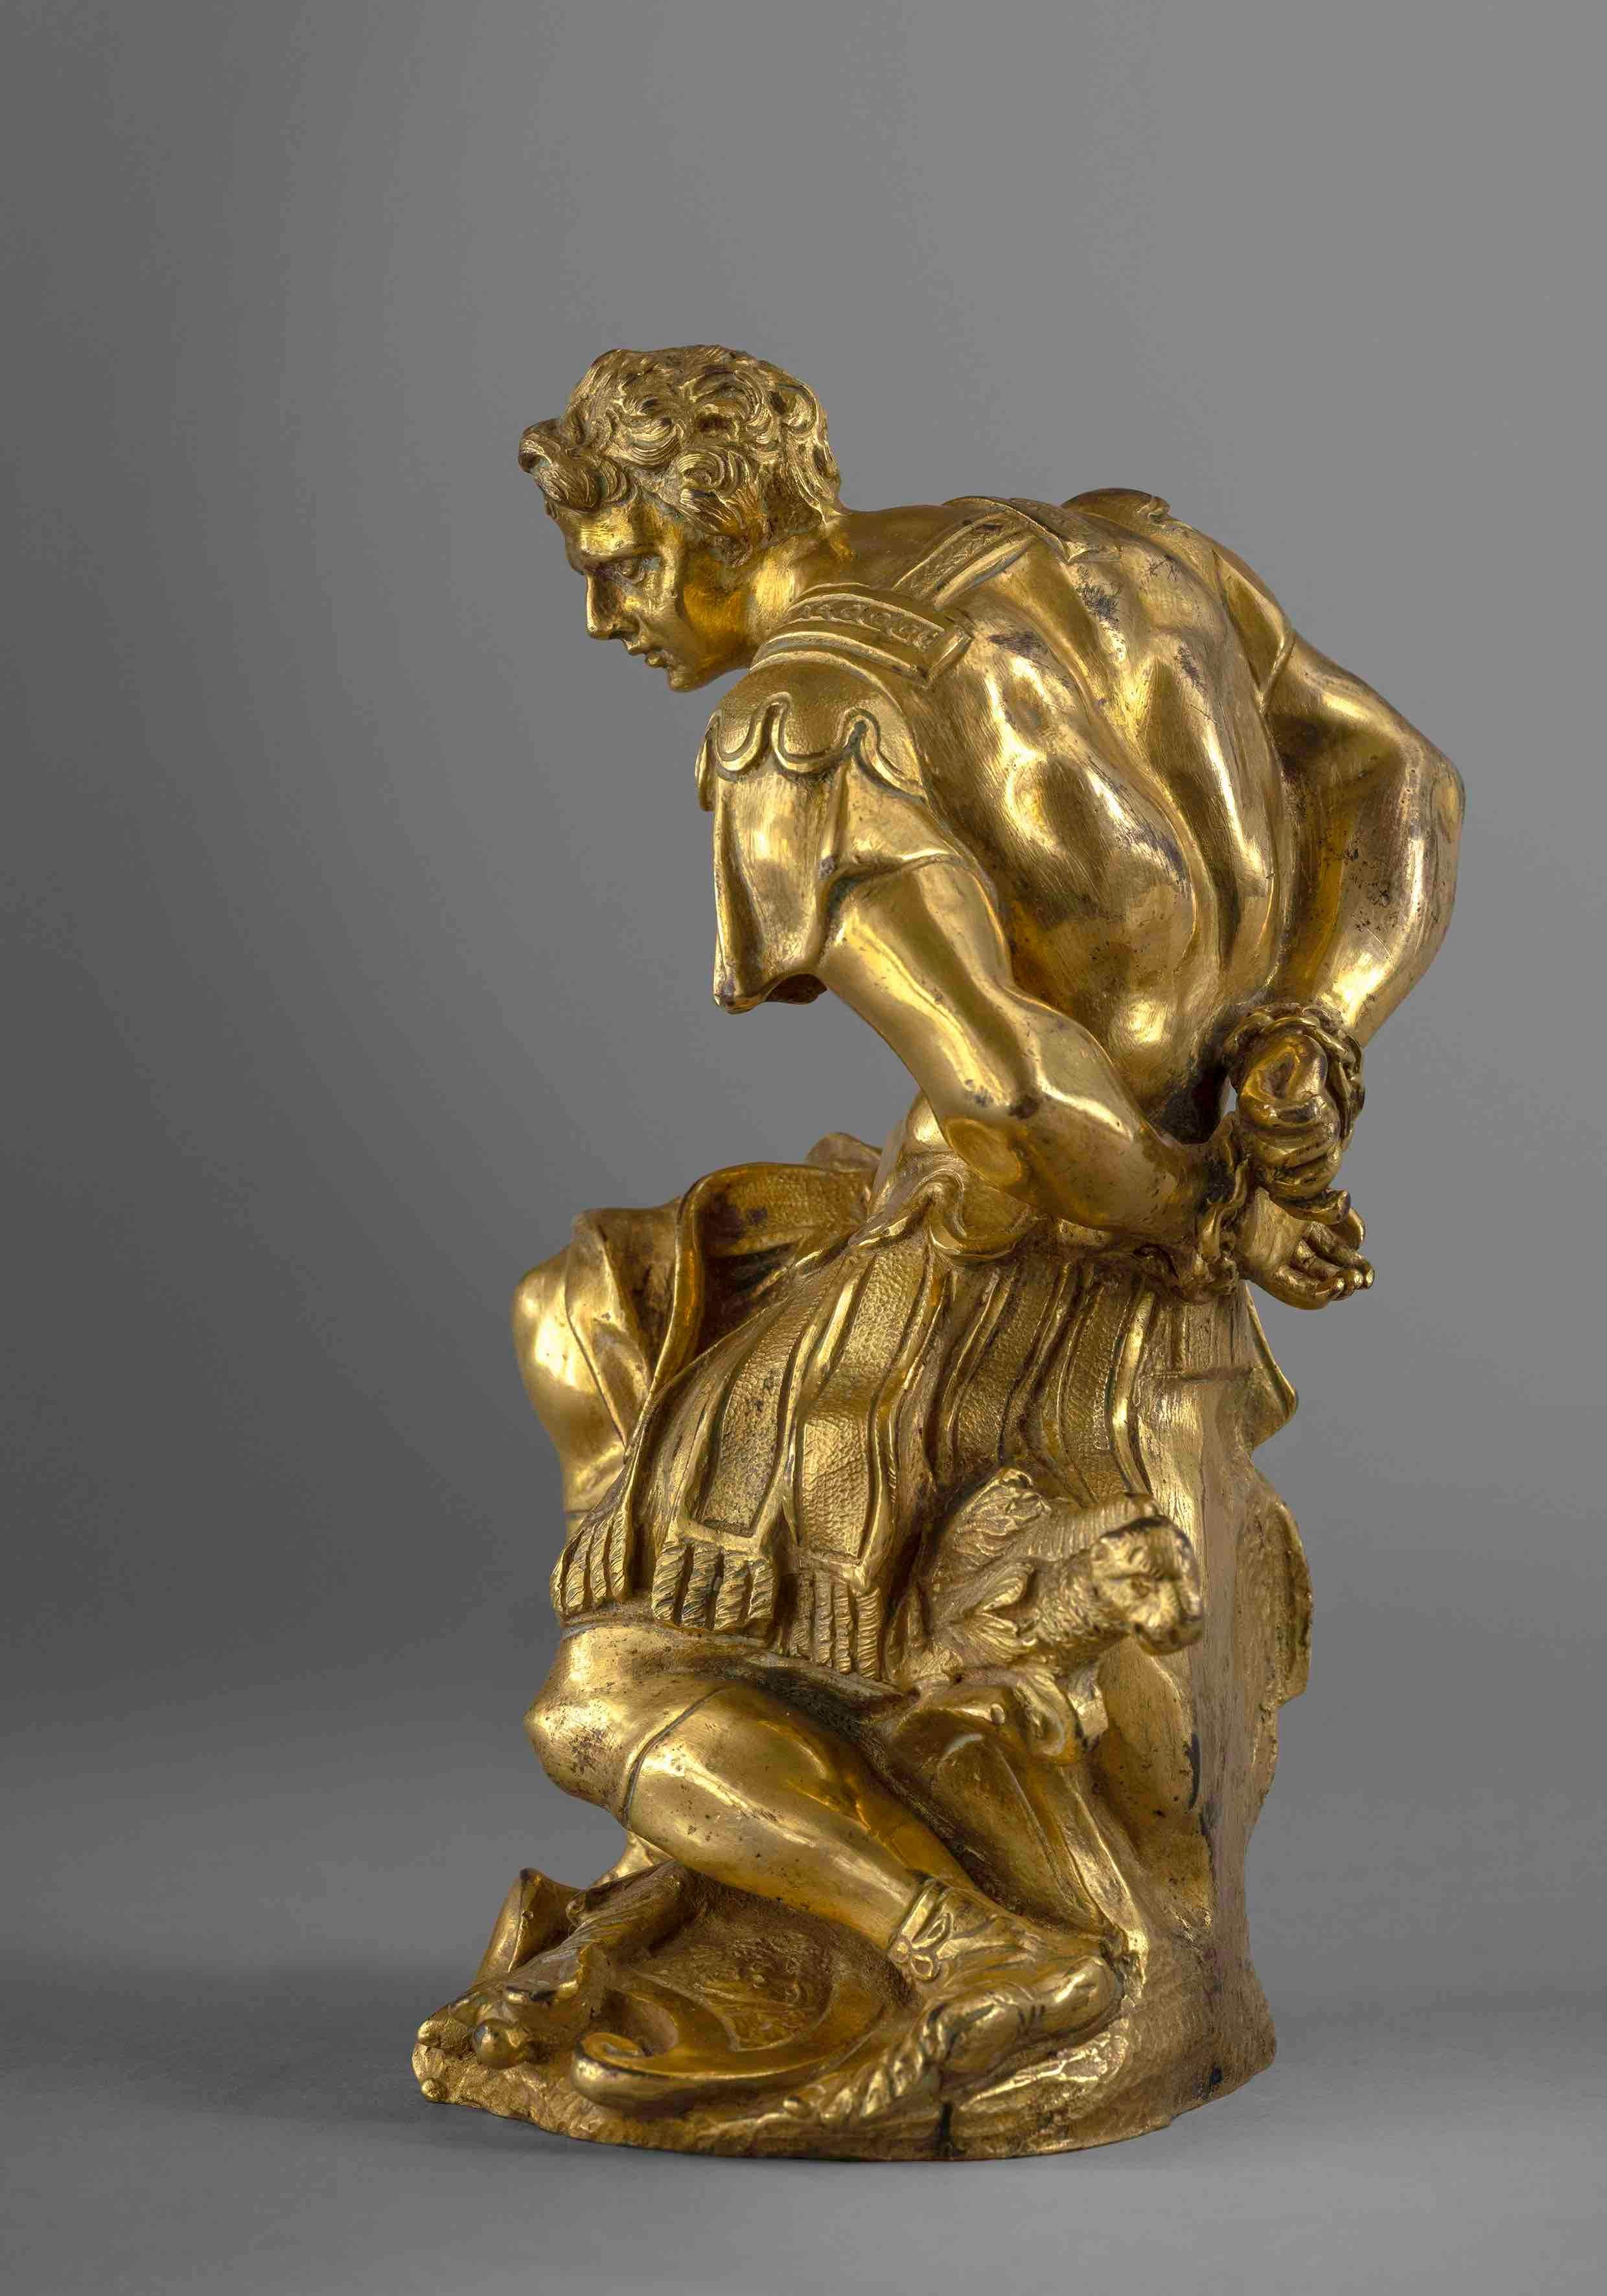 A Captive Soldier

Gilt Bronze, Lost Wax
Italie (Rome), 17th century
H 17 x Dia 10 cm
H 6 2/3 x Dia 4 inch

The 17th century witnessed a flourishing of artistic expression across Europe, particularly in Rome, where the Baroque movement reached its